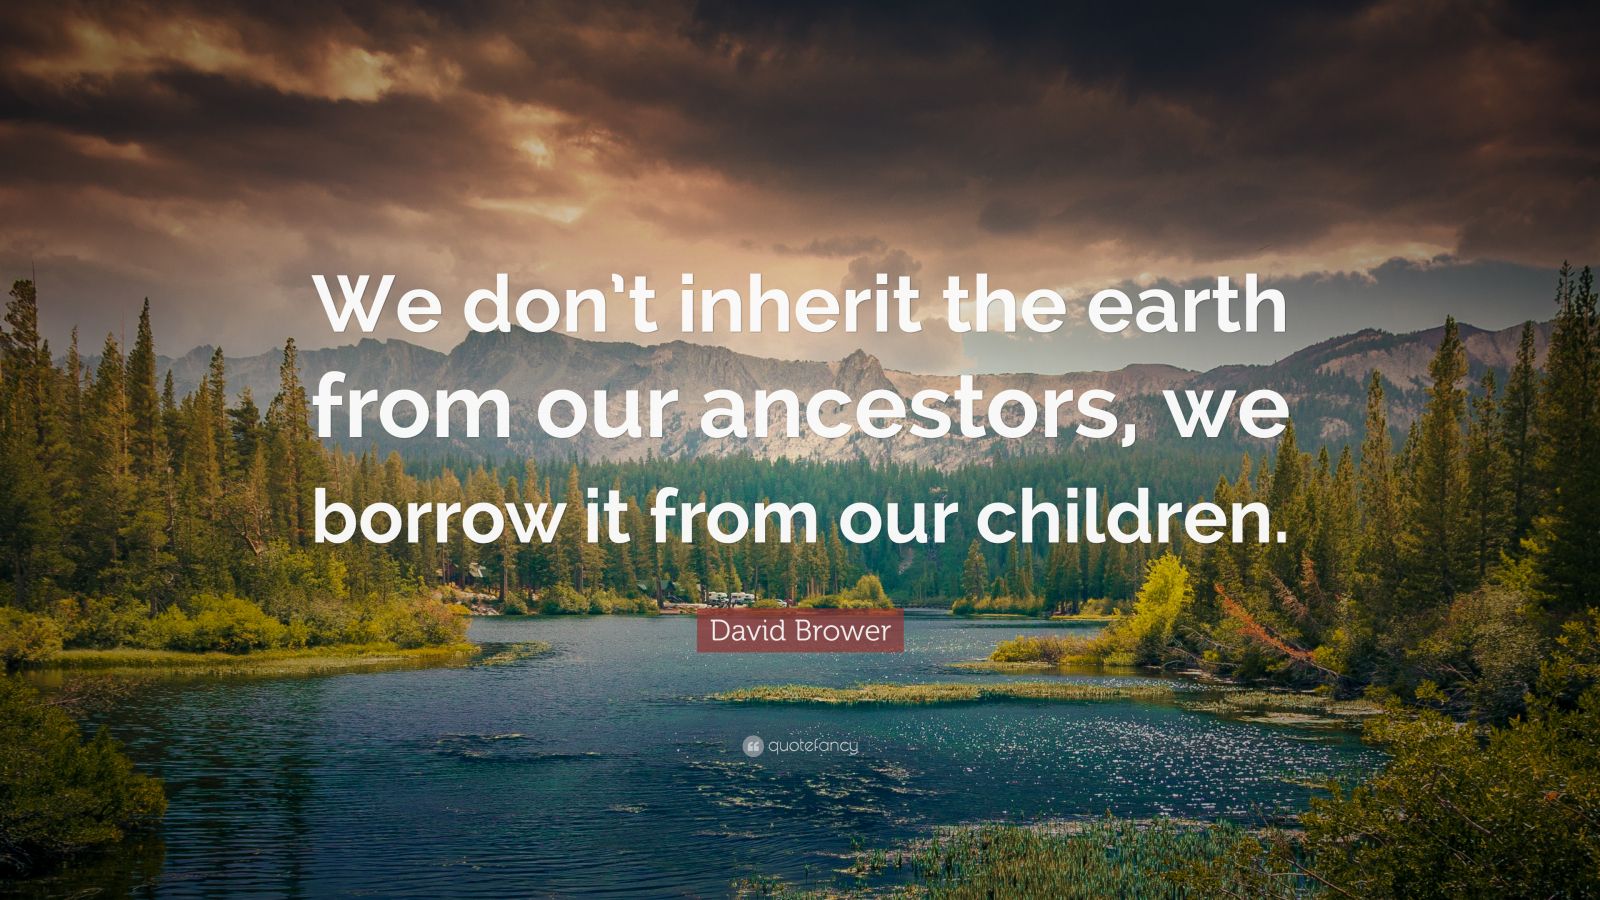 David Brower Quote: “We don’t inherit the earth from our ancestors, we